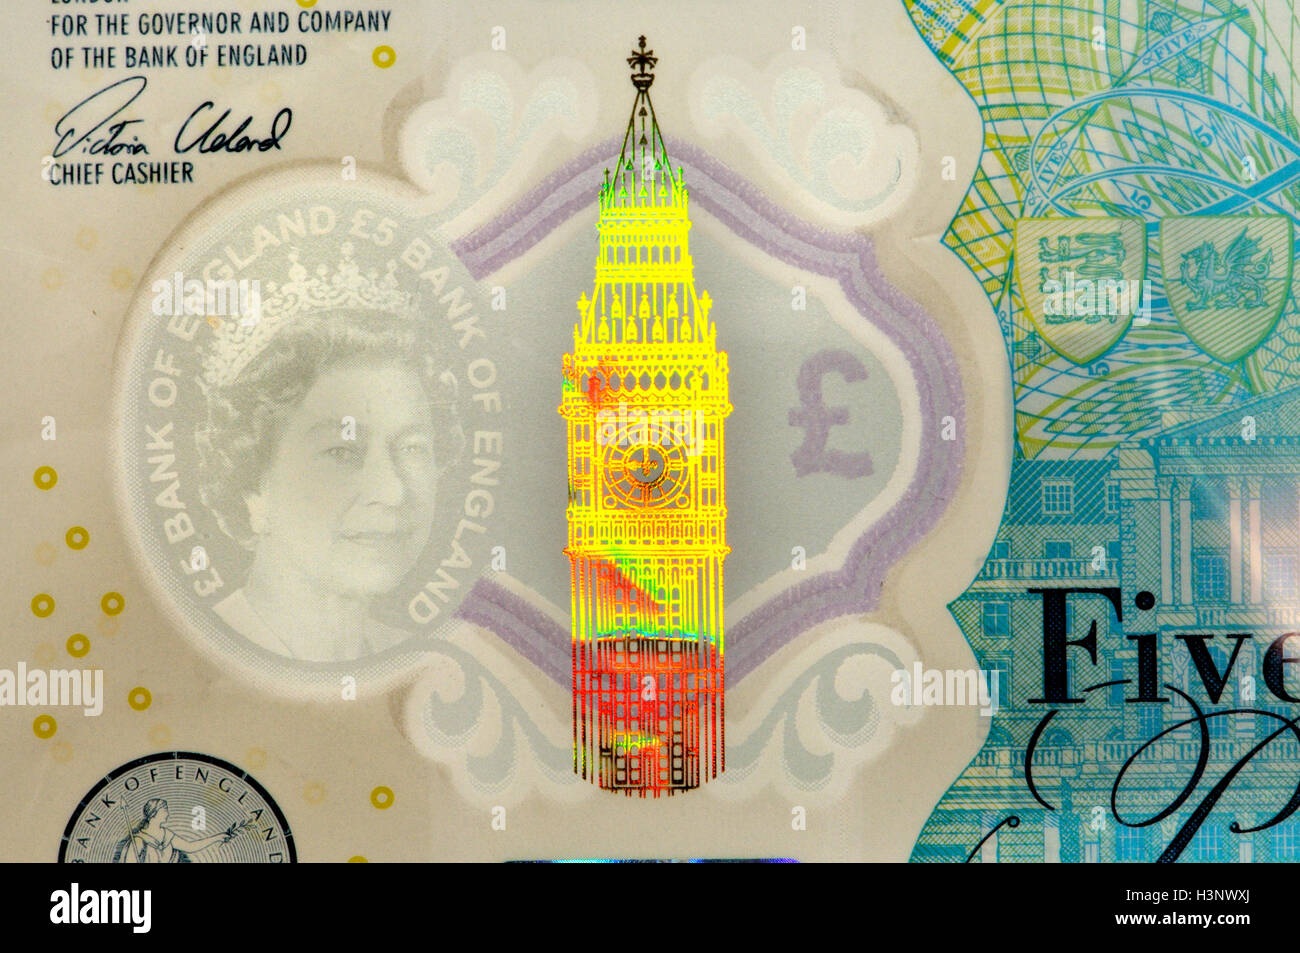 New (2016) British plastic £5 note showing security features: transparent 'watermark'; Big Ben hologram; 'Eurion constellation'. Stock Photo